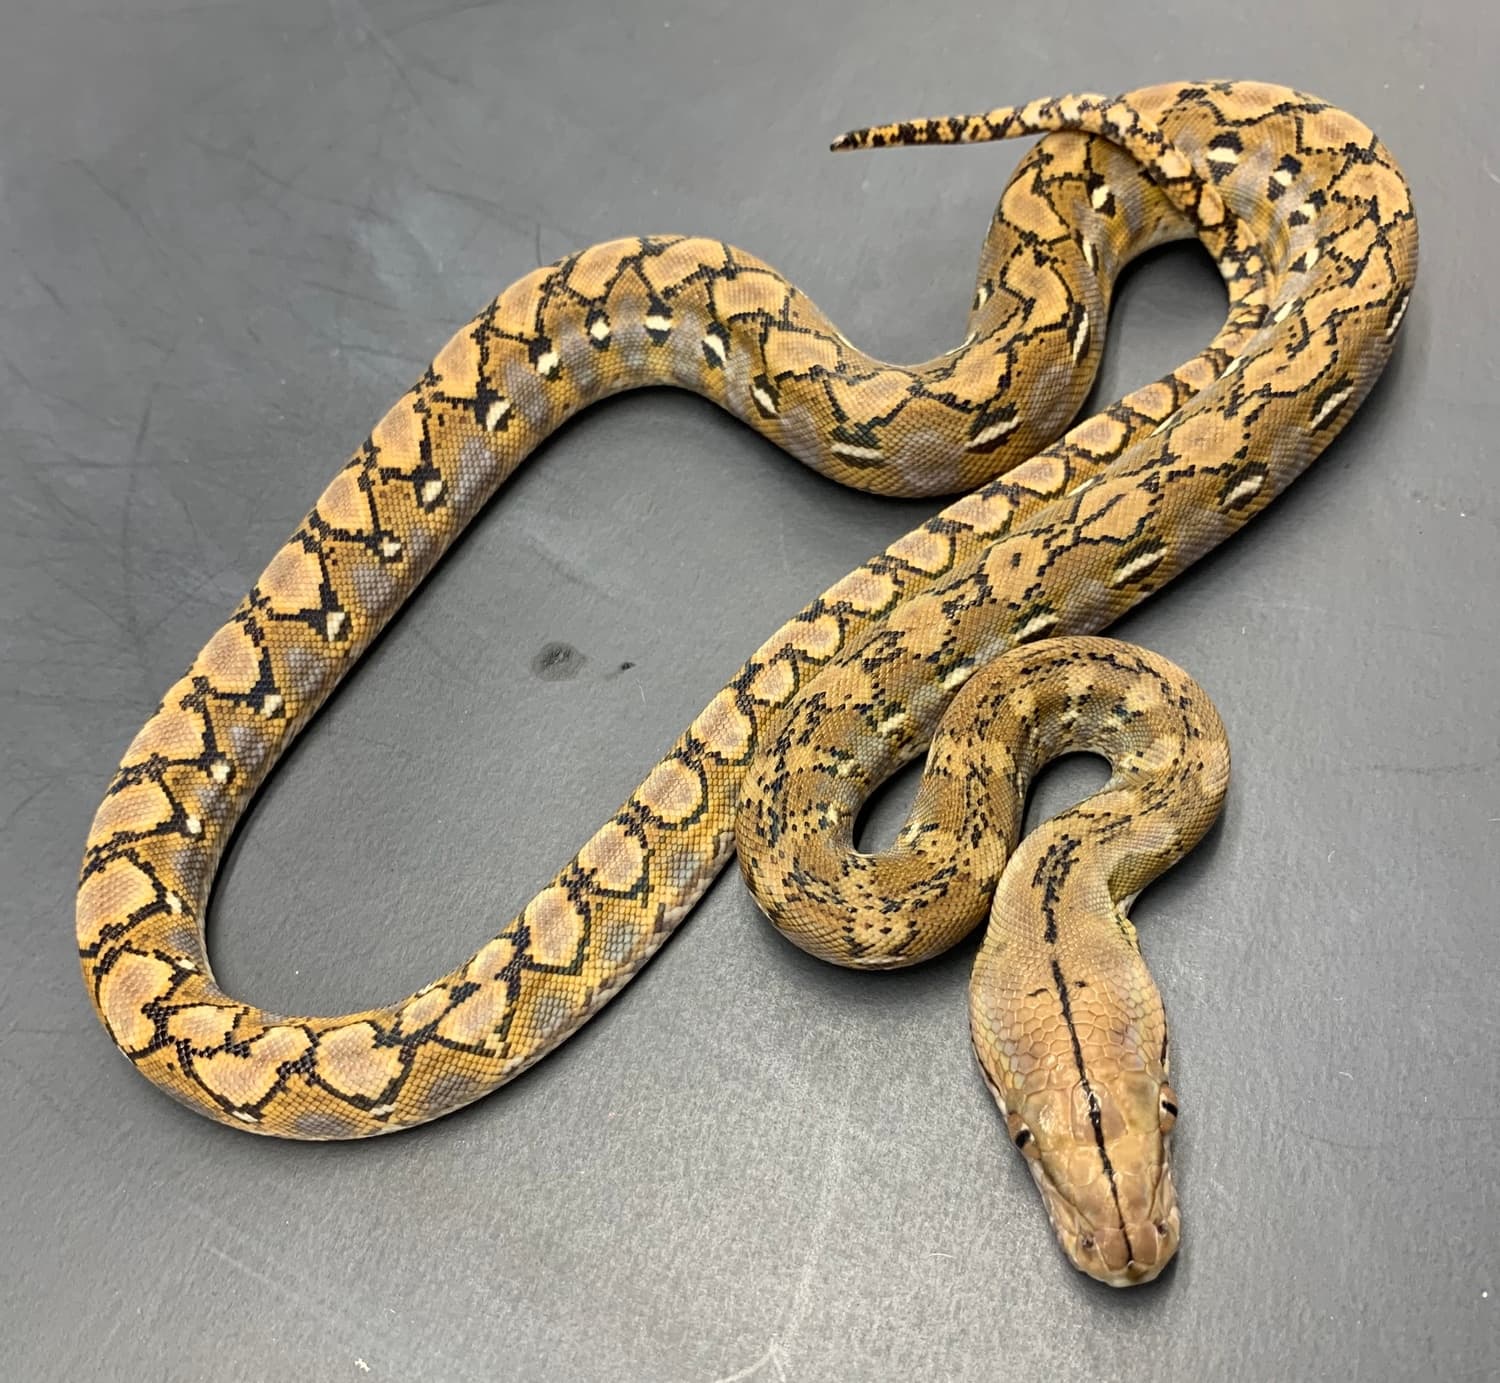 75% Kalatoa SD Platinum 50% Het Anery Reticulated Python by New Shed Serpents